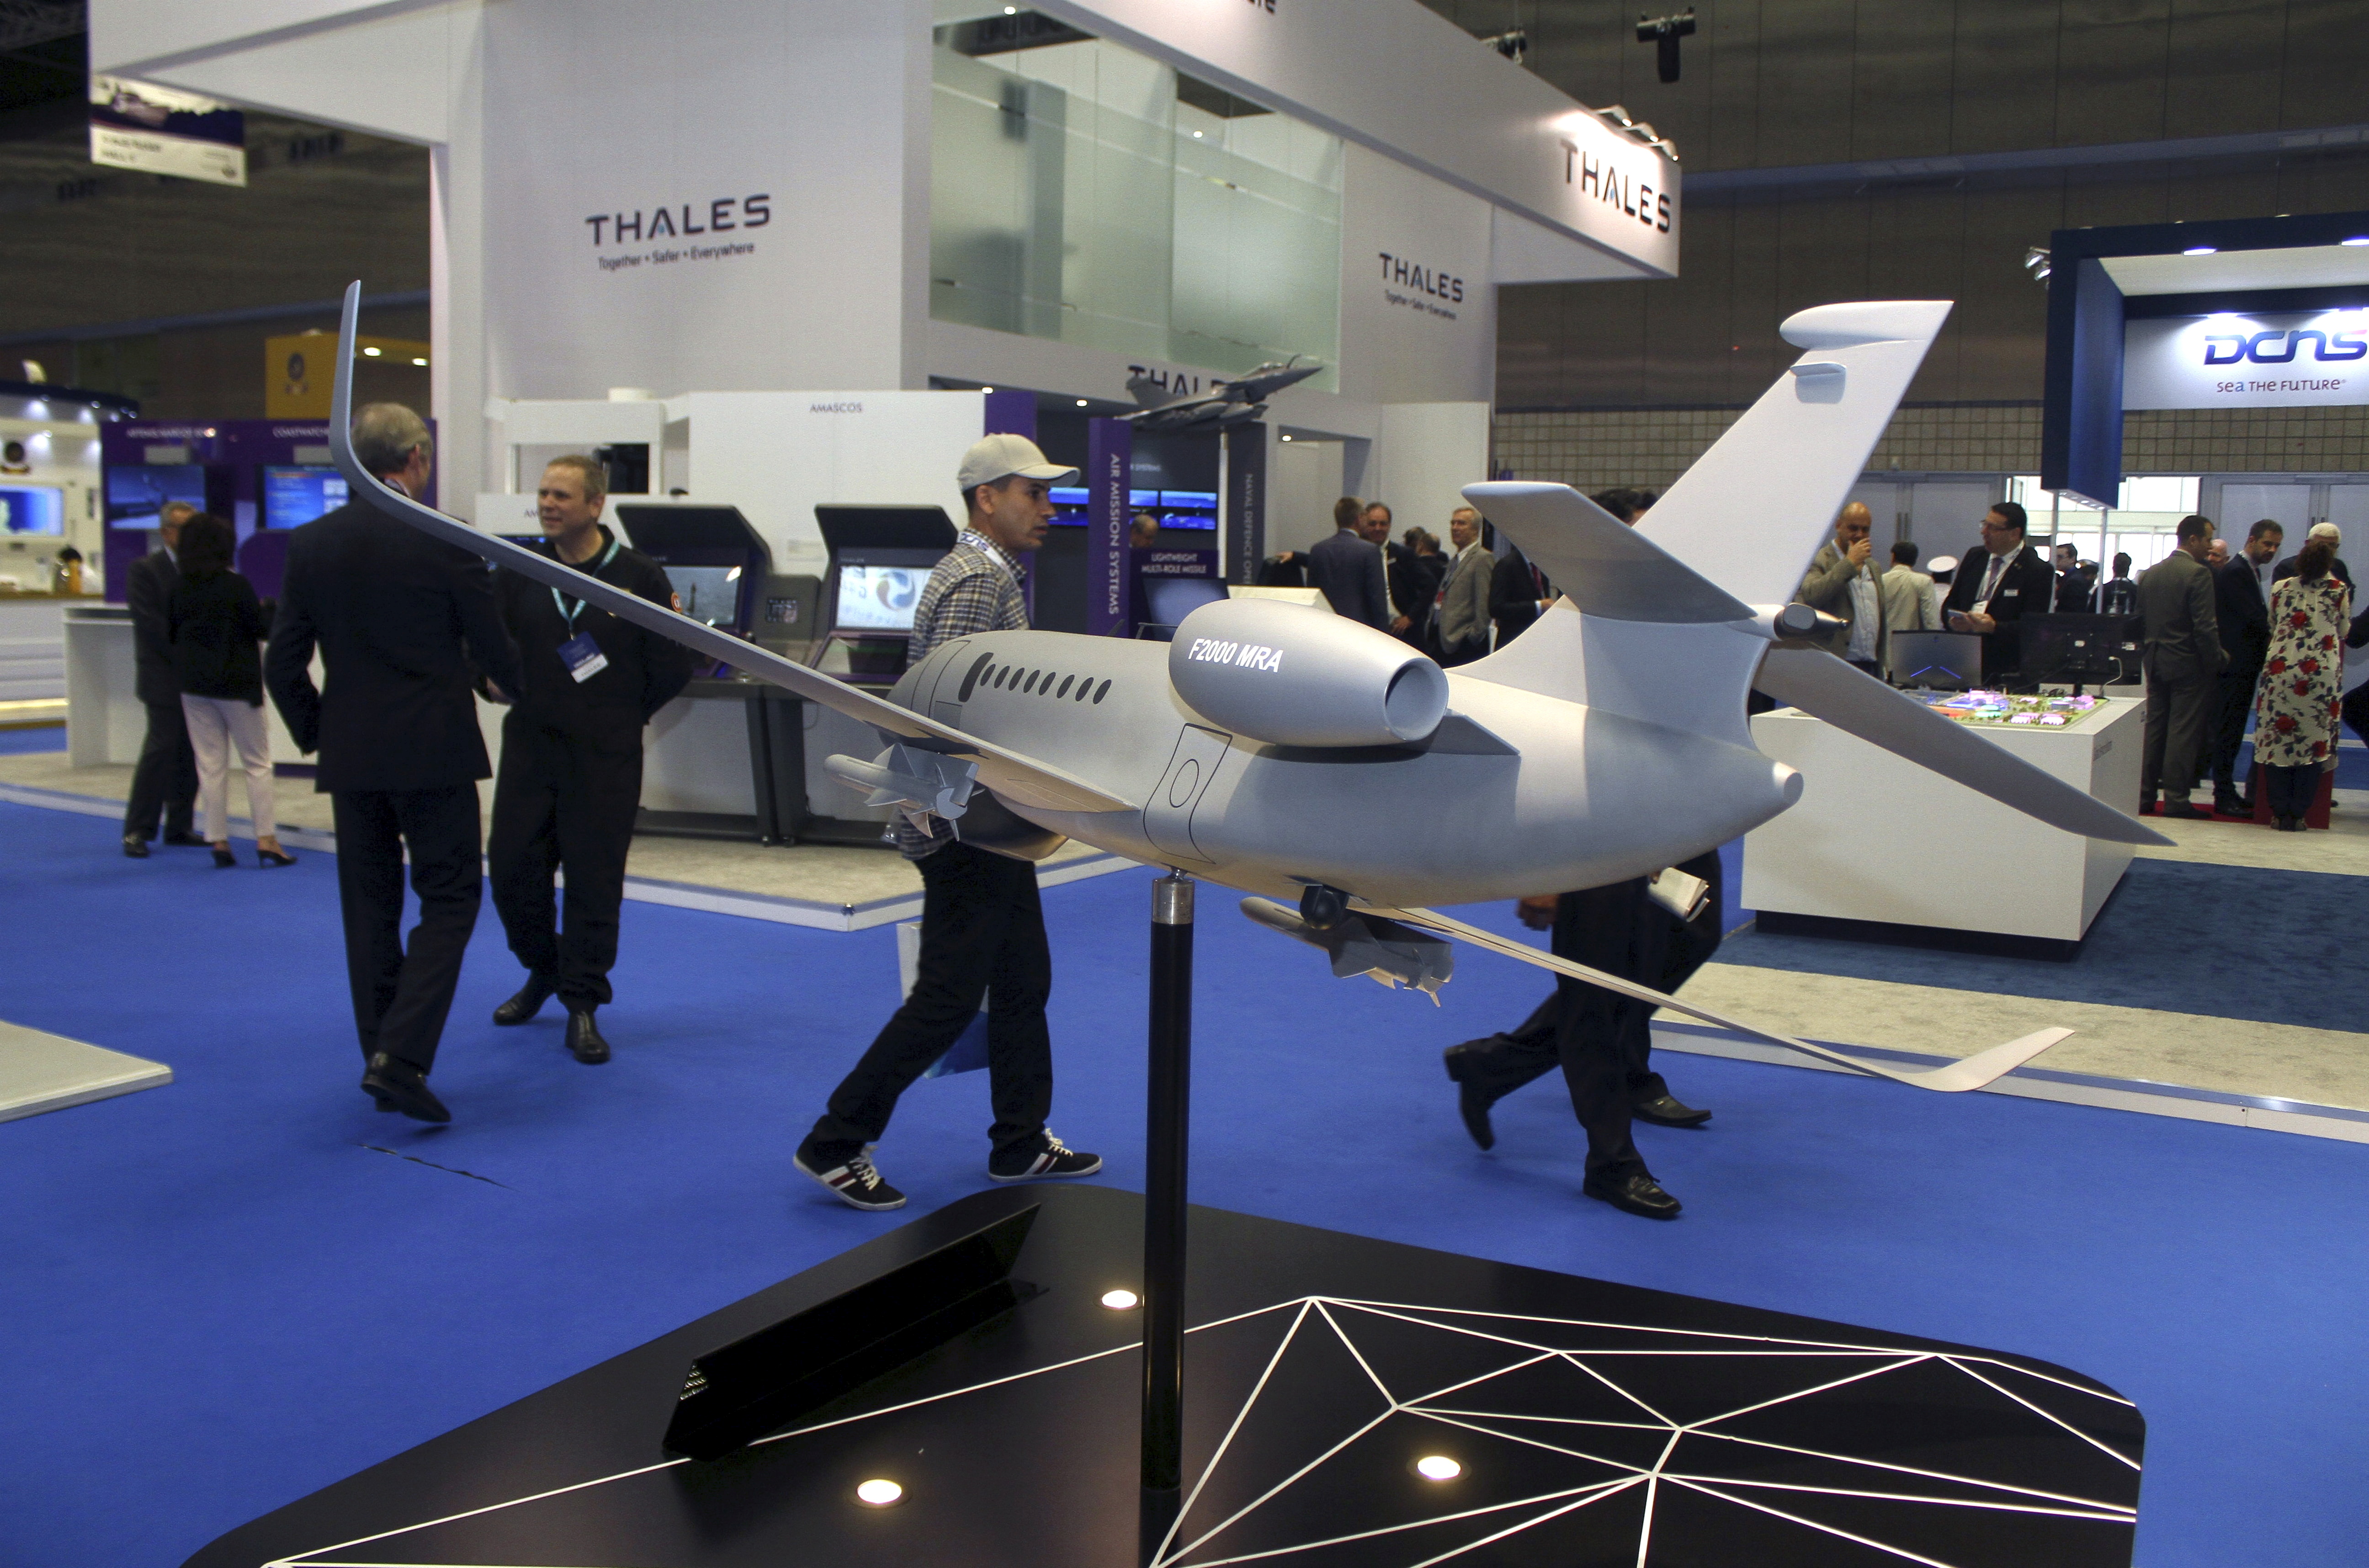 Visitors walk next to model of Dassault Falcon 2000 MRA aircraft during Doha International Maritime Defence Exhibition